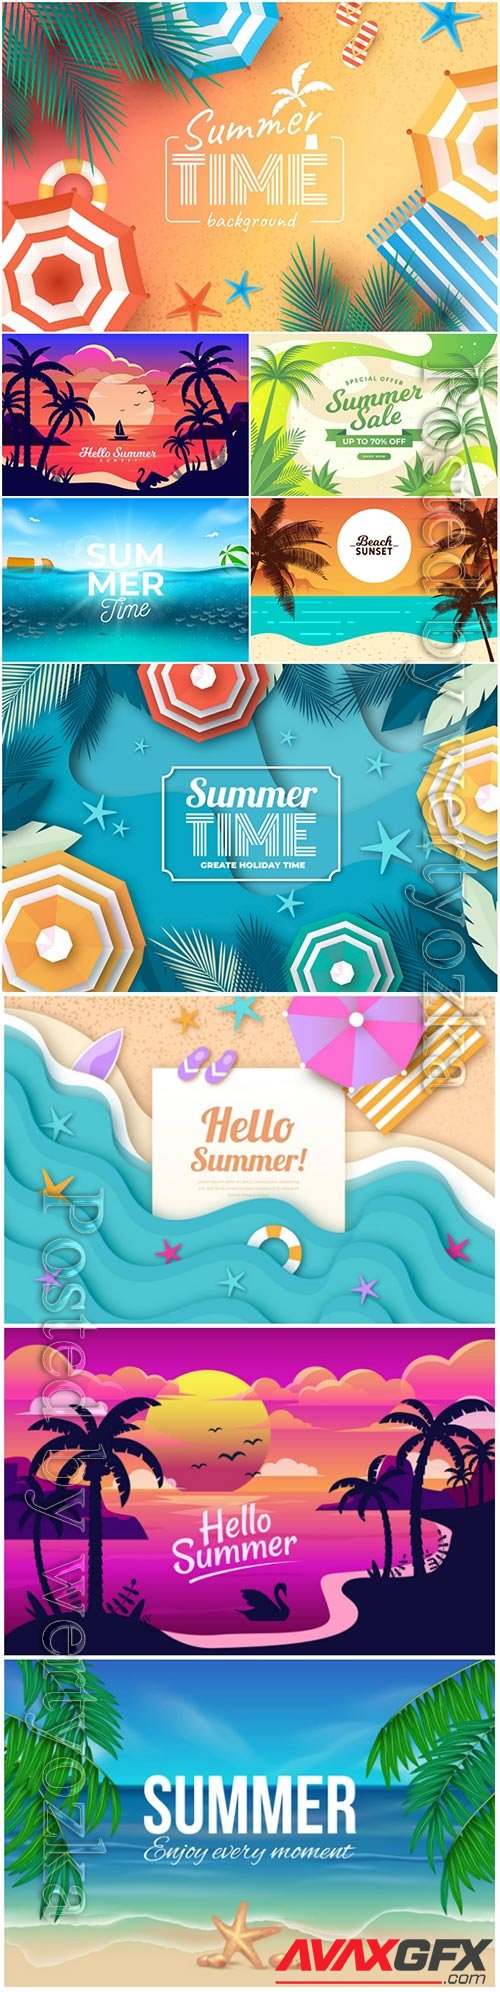 Summer realistic vector background with beach